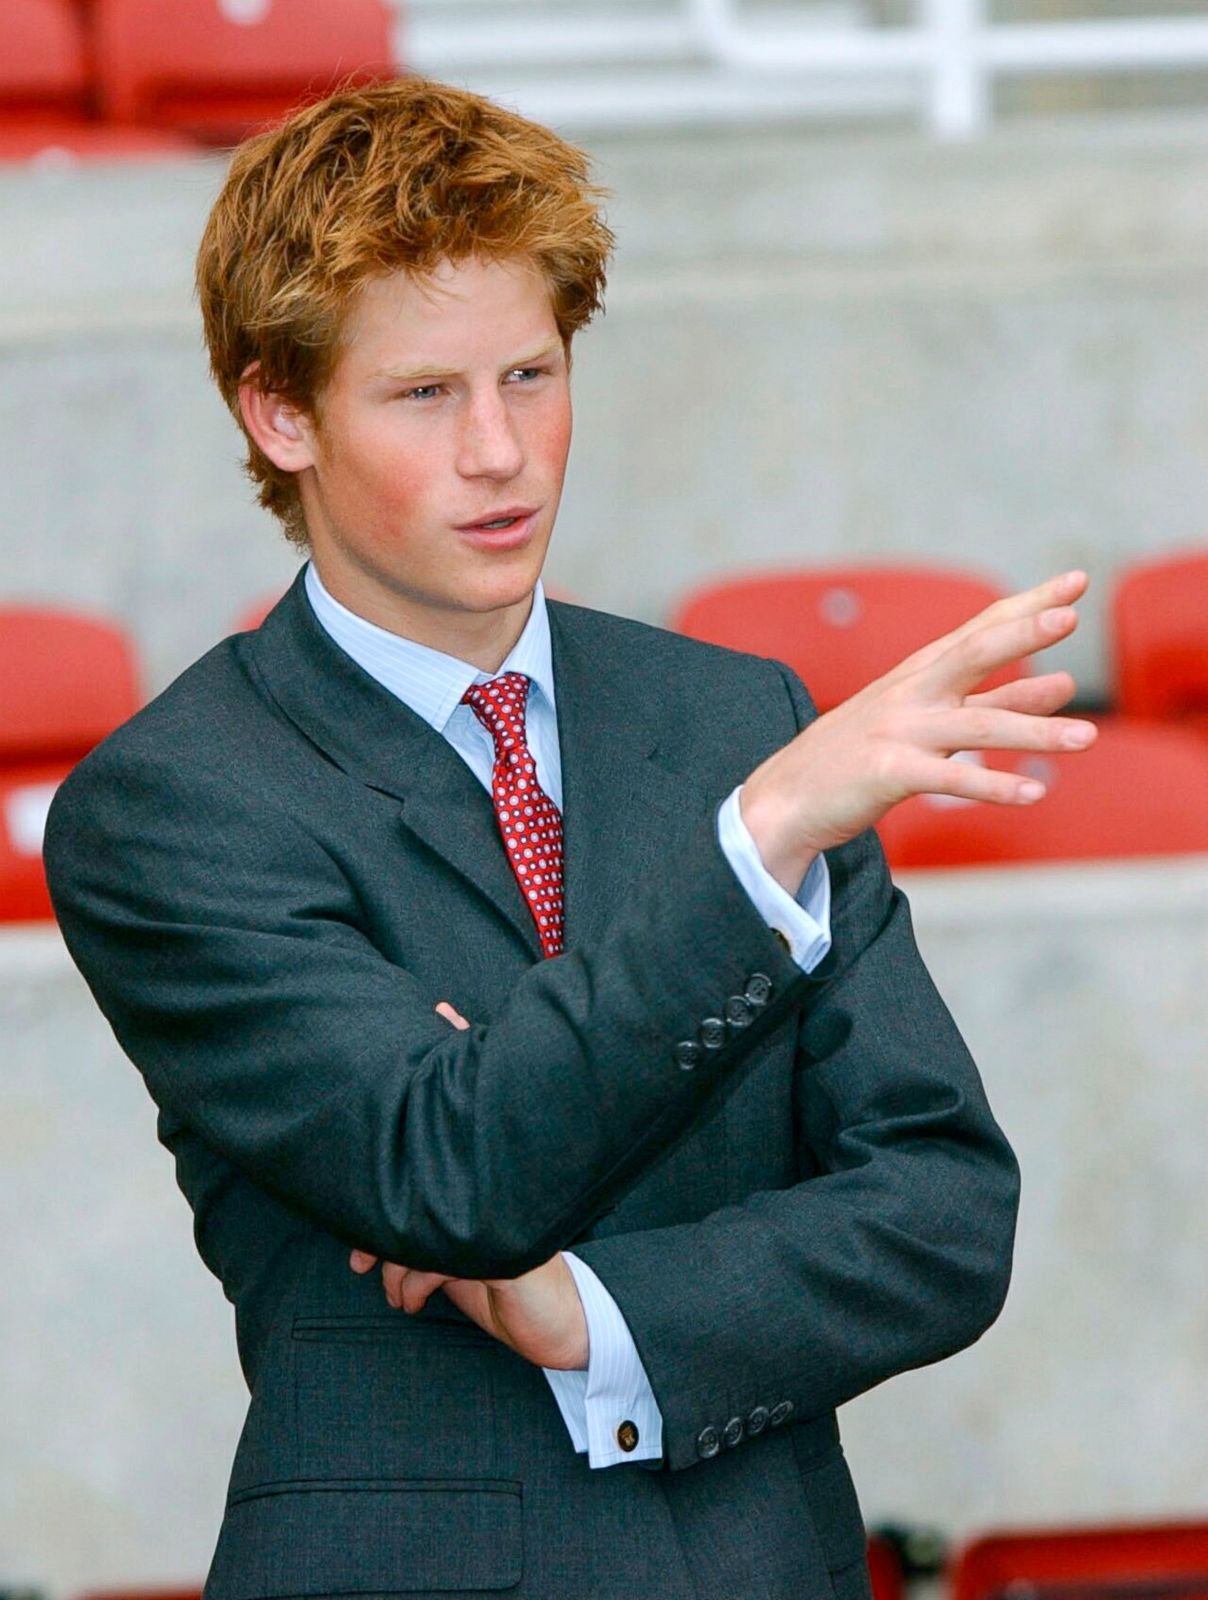 The Prince Harry Enigma: Uncovering The Real Identity Of The Royal